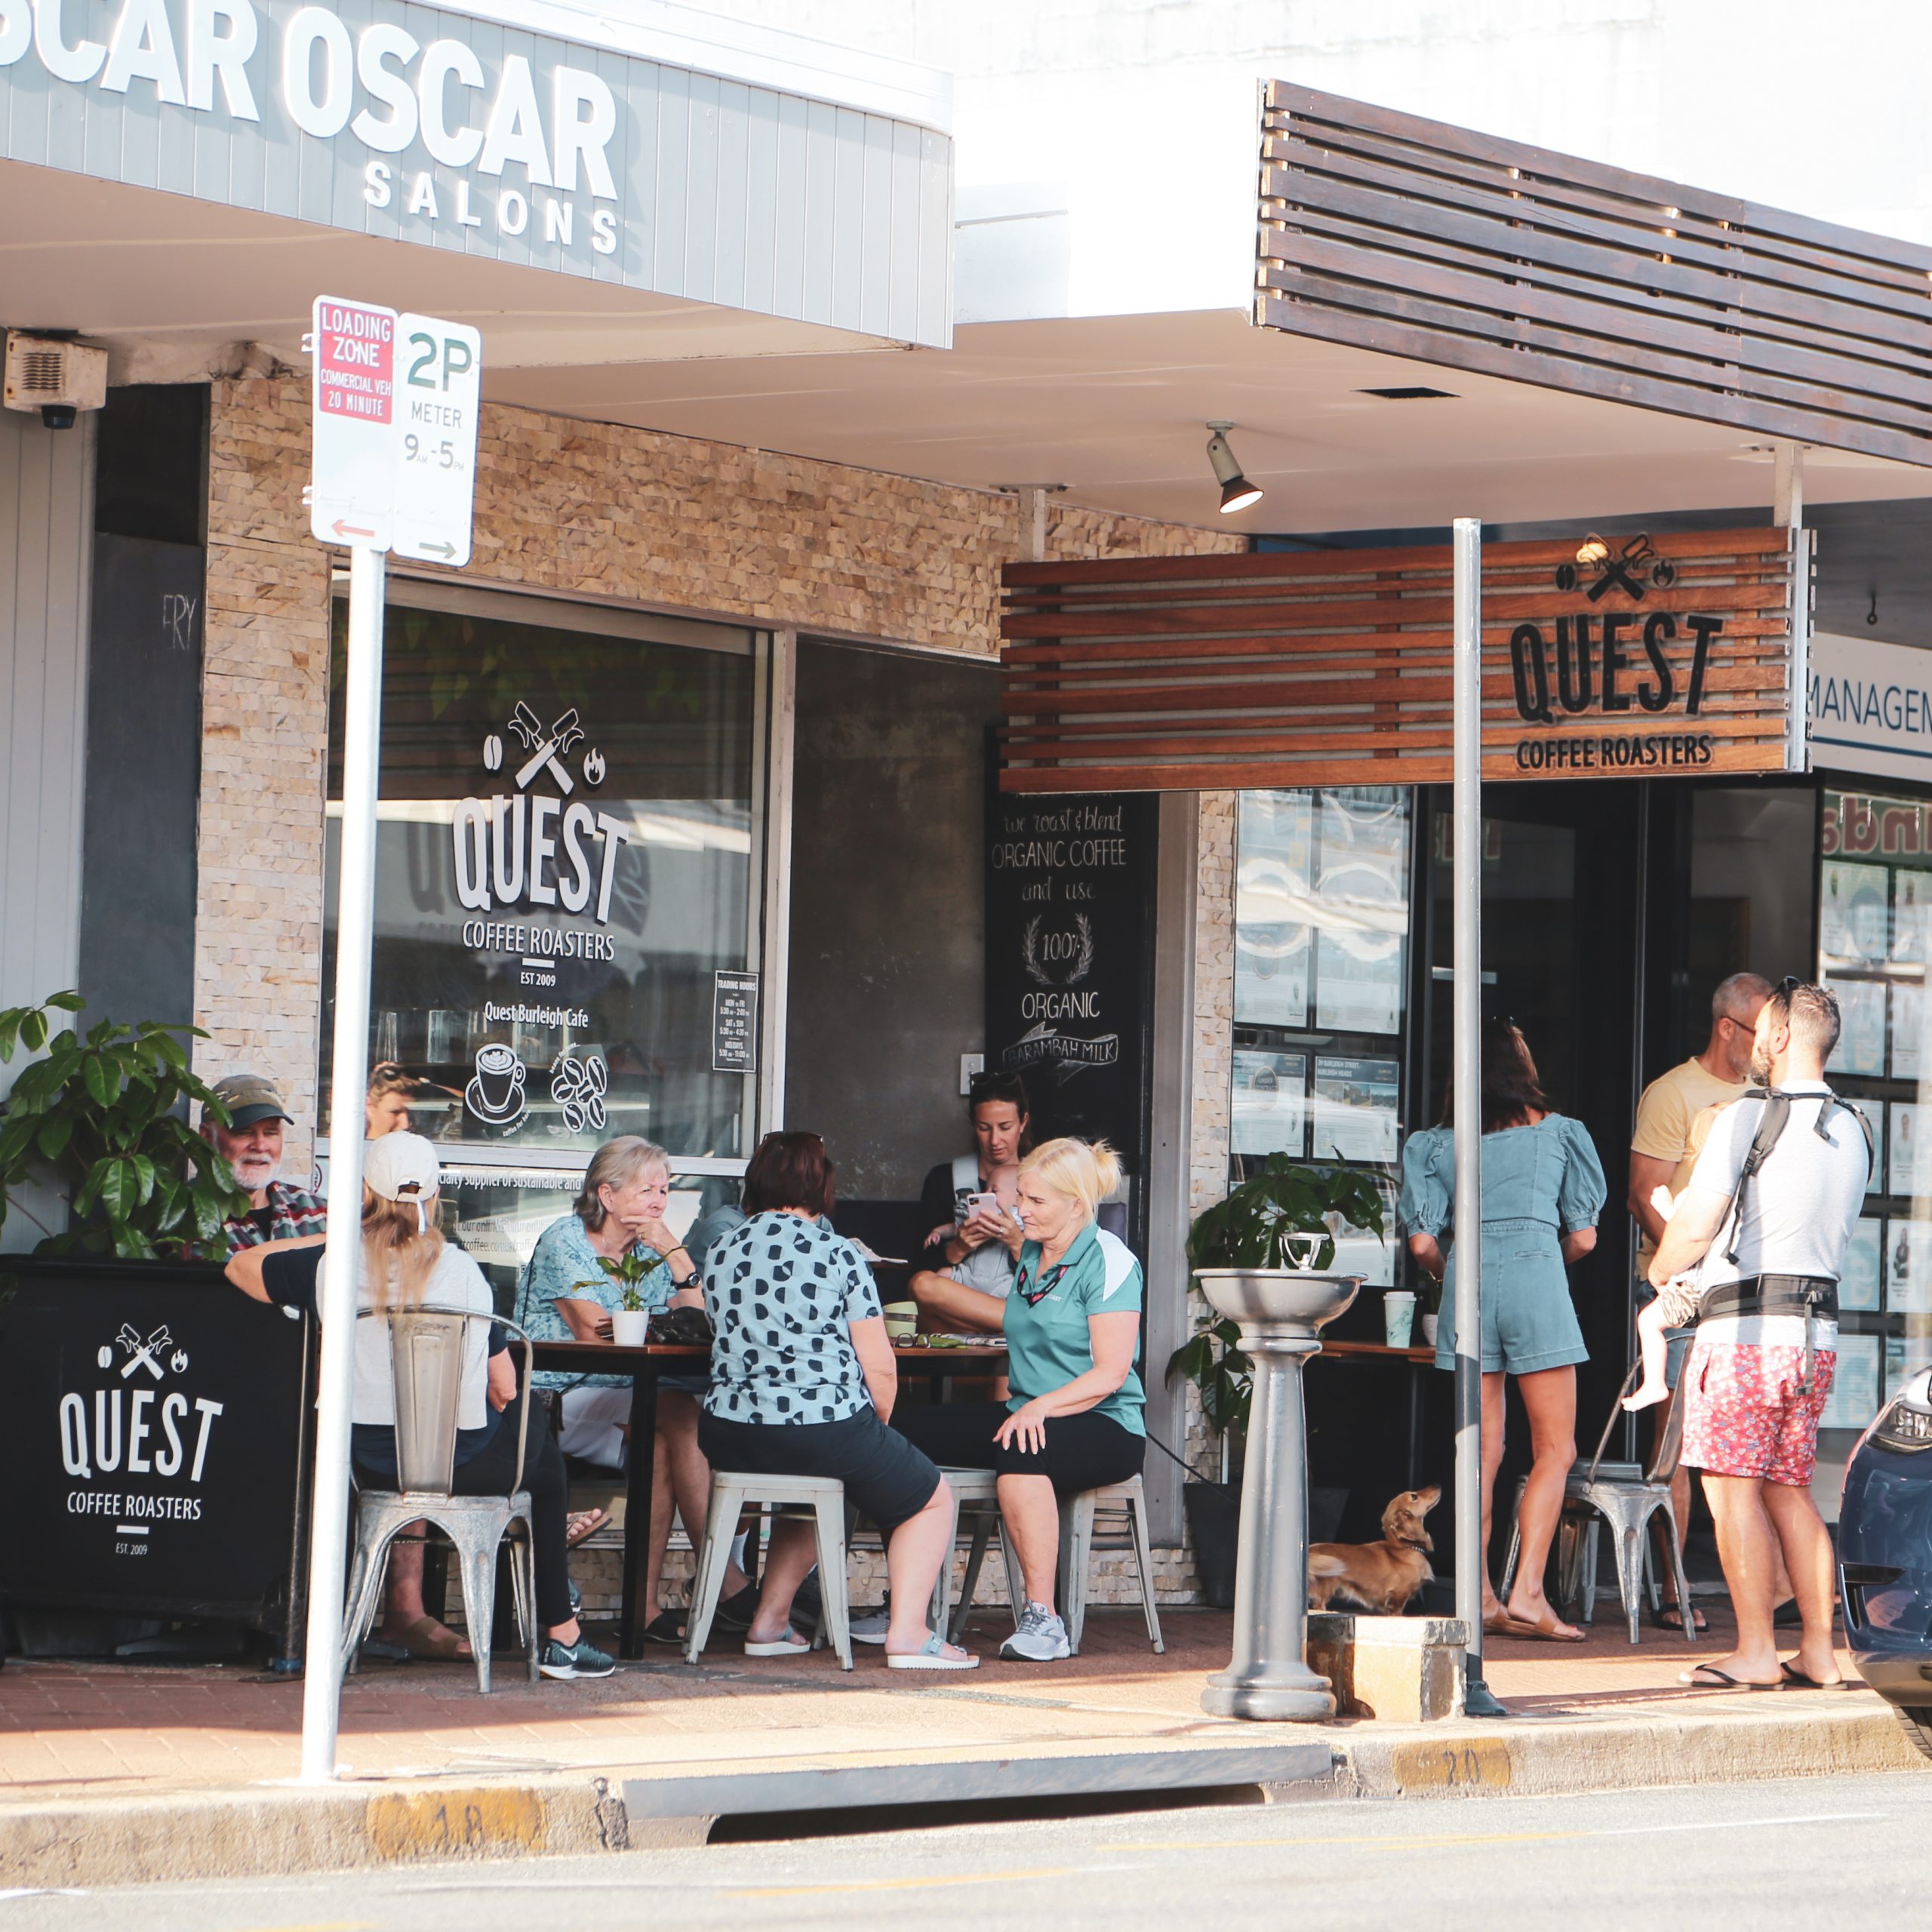 quest-221107-quest-burleigh-cafe-front